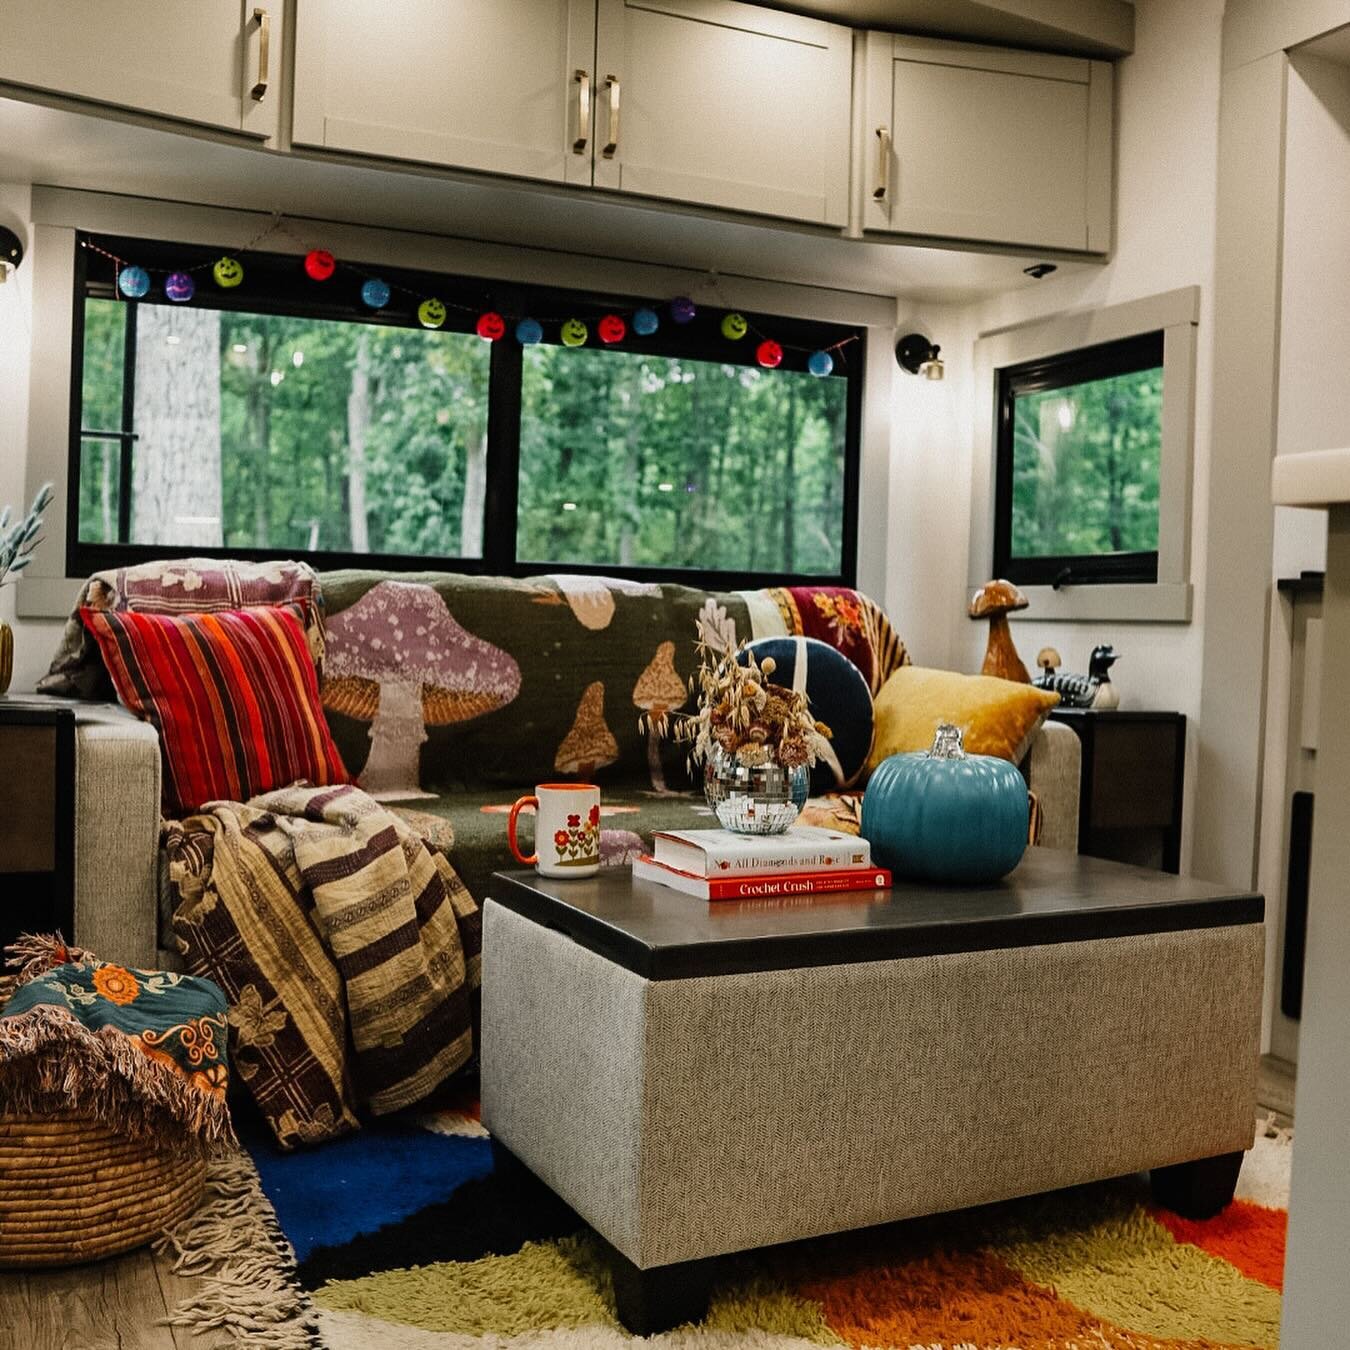 If this photo was scratch and sniff, it would definitely smell like patchouli. 

Would you agree? 

🪩

#bohointeriors #eclectichomedecor #fifthwheel #maximaliststyle #modernbohemian #rvlivingfulltime #fifthwheellife #brinkleyrv #rvdecor #moderntinyl